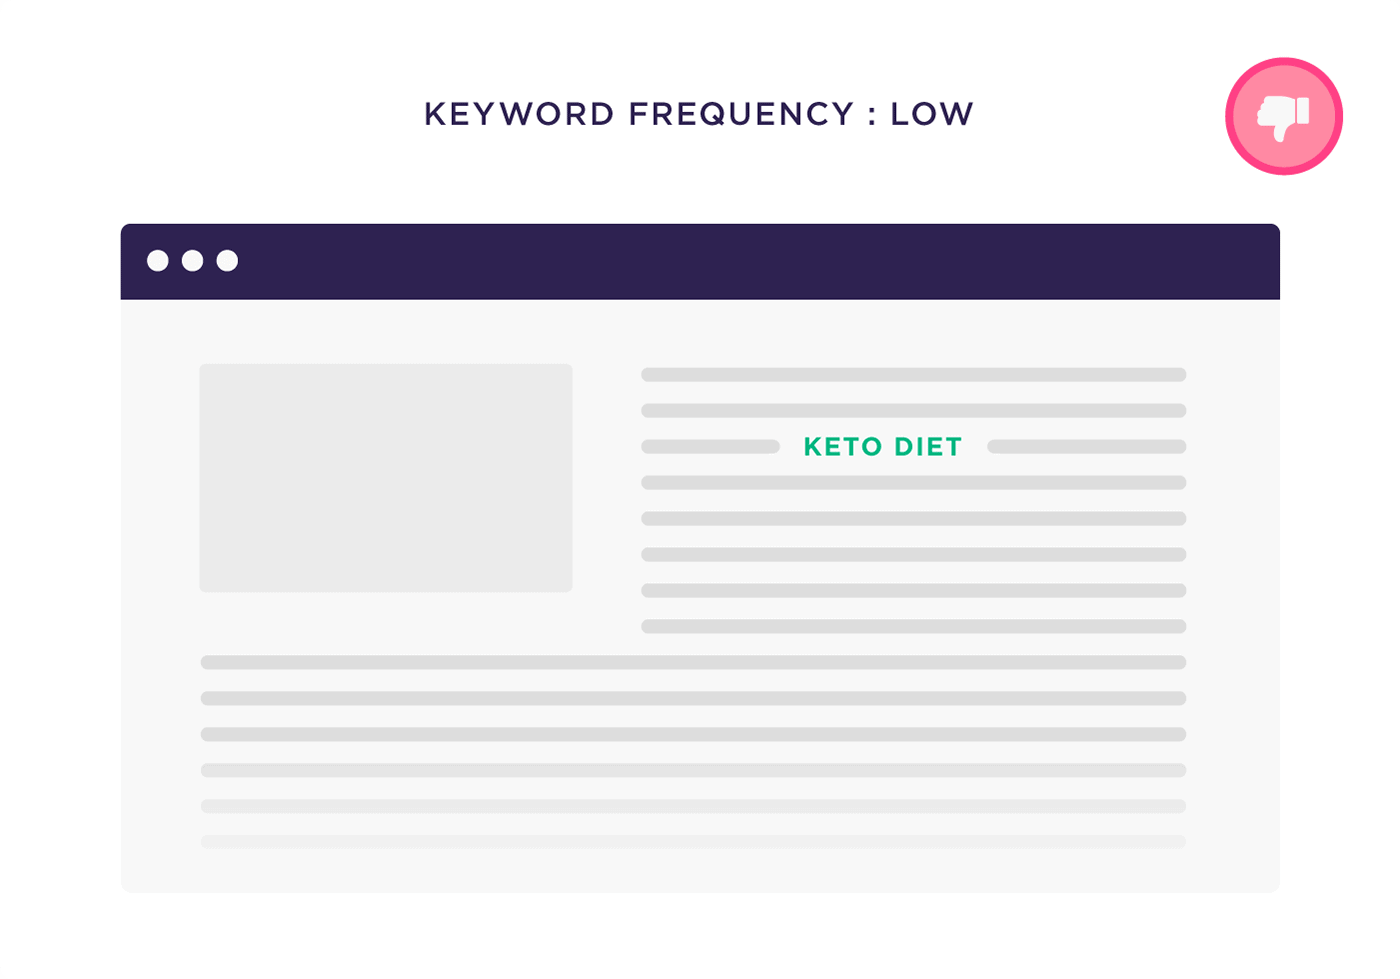 Keyword frequency : Low